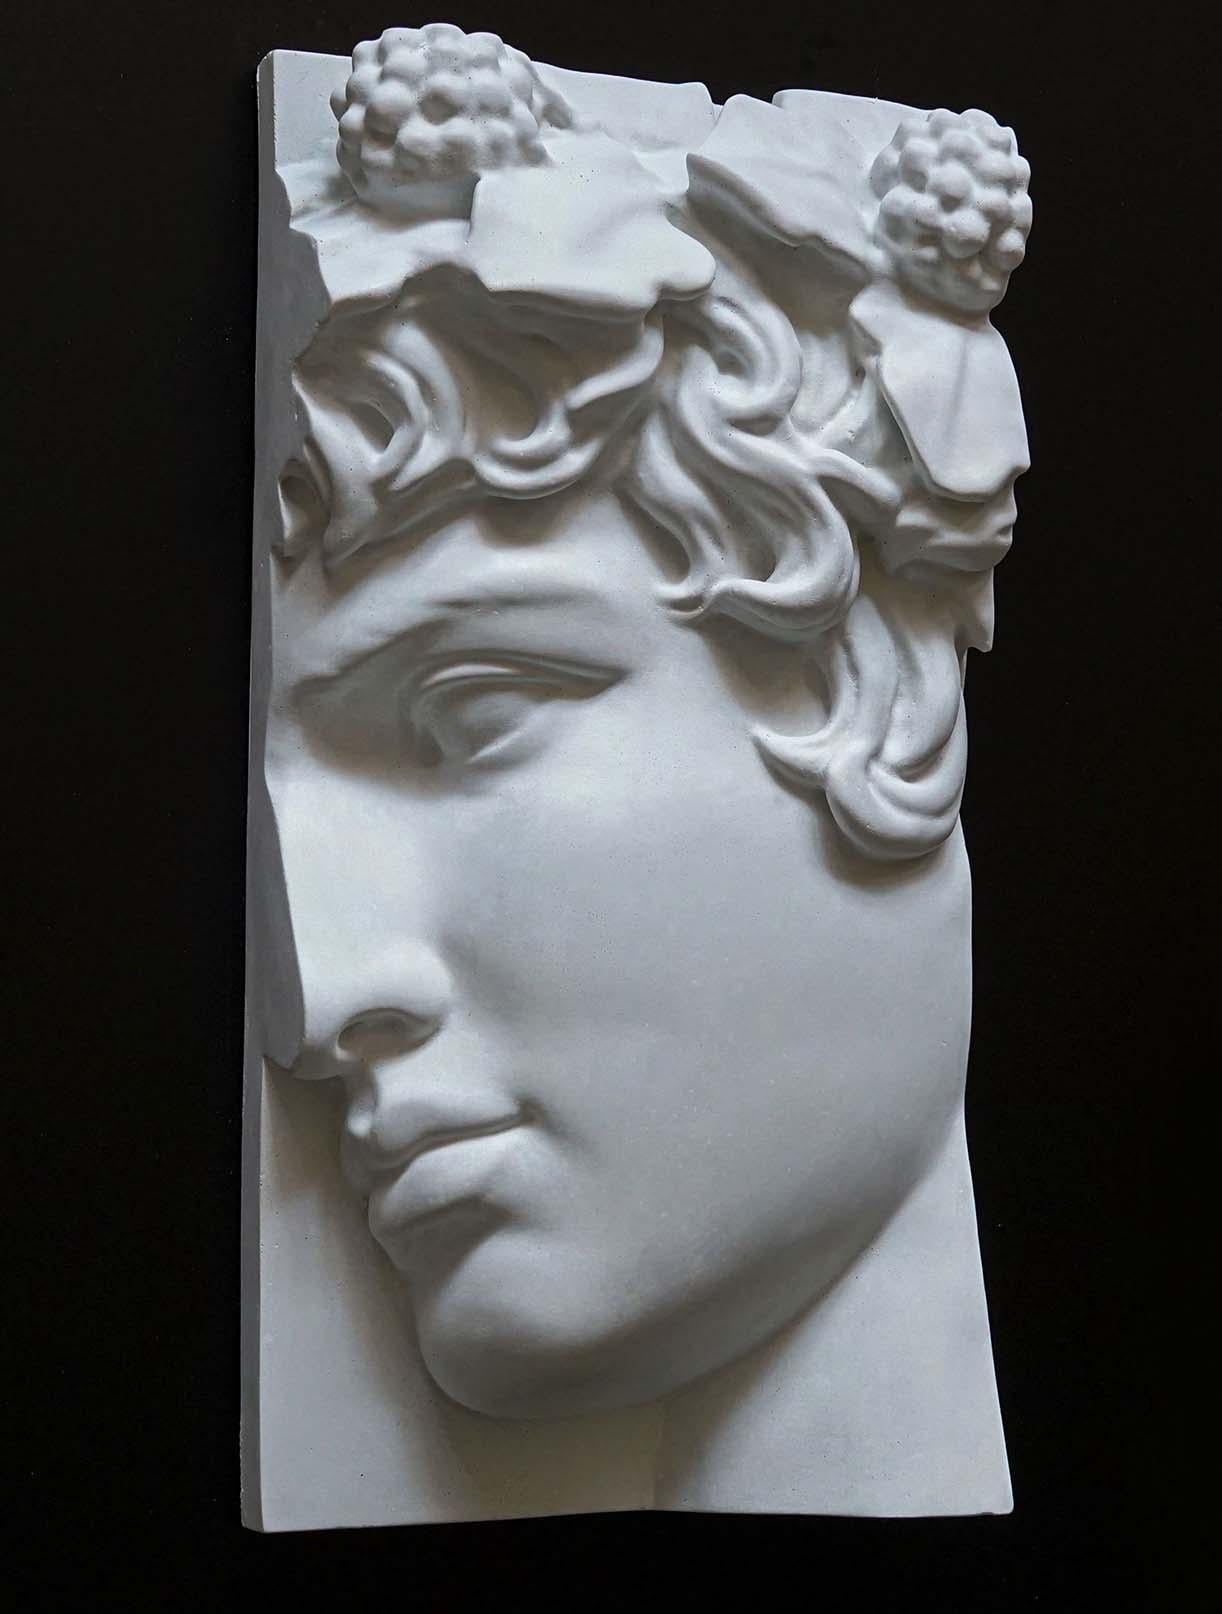 From extremely detailed 3D scans of the most important classical sculptures of all times, Eduard Locota has digitally sliced and extracted the essential portion of the artwork, then physically 3D-printed it into a new representation fit for the